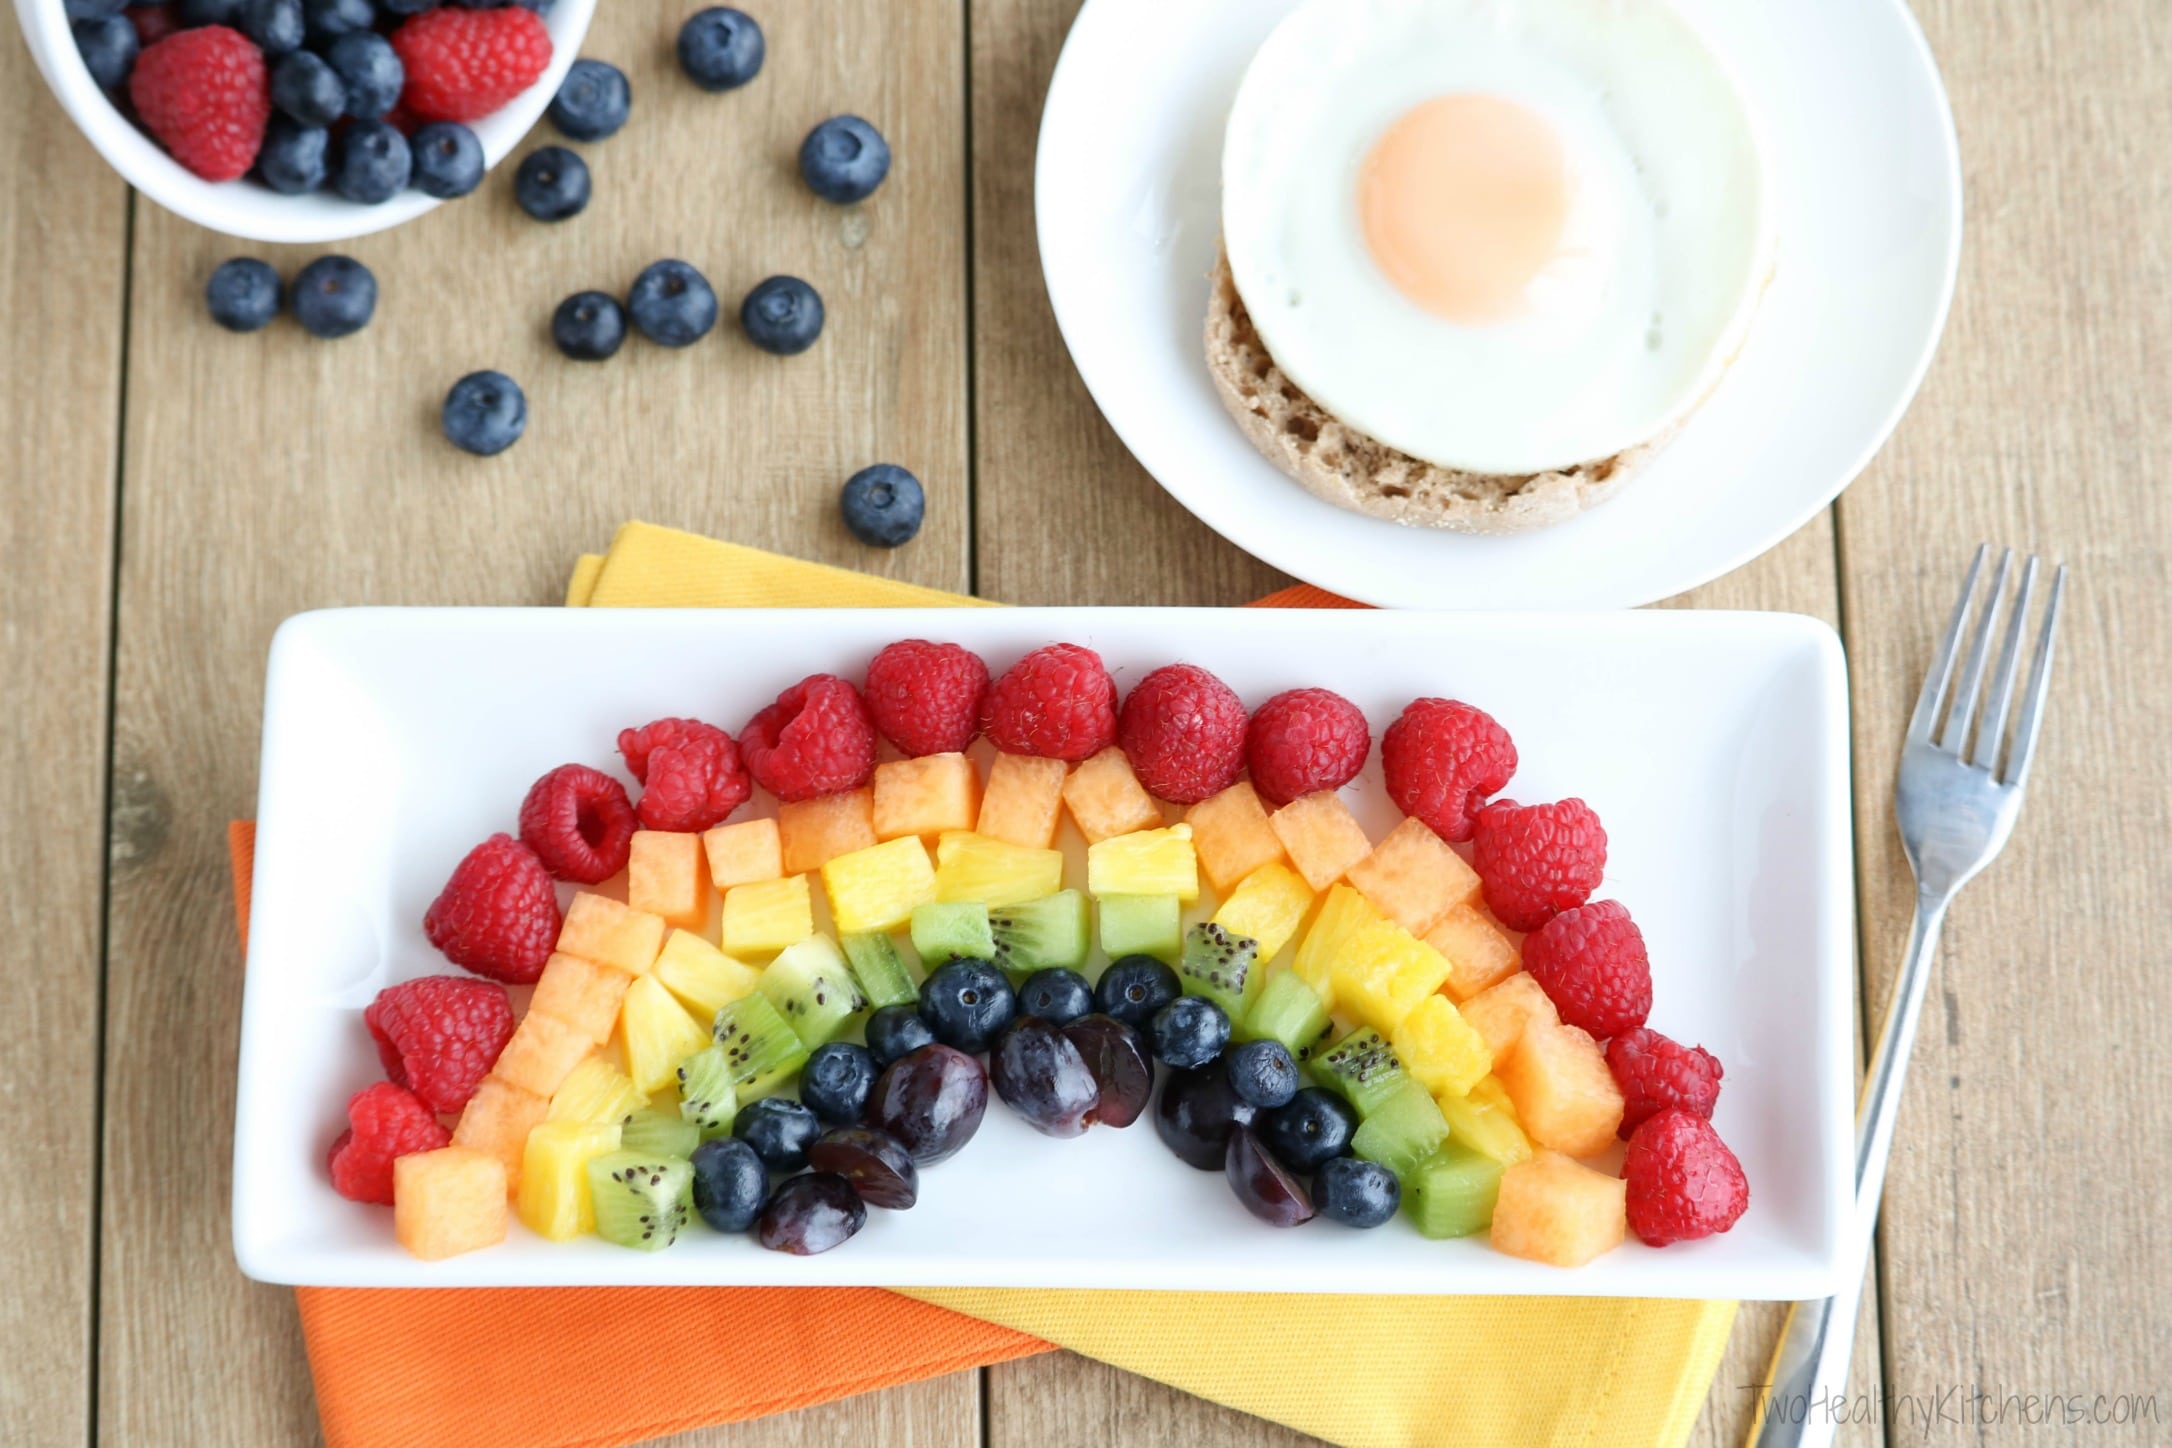 Your kids will love this Fruit Rainbow Breakfast recipe … complete with a pot o’ gold! And you'll love all the great nutrition - literally eating a rainbow! A fun, healthy breakfast idea! | www.TwoHealthyKitchens.com